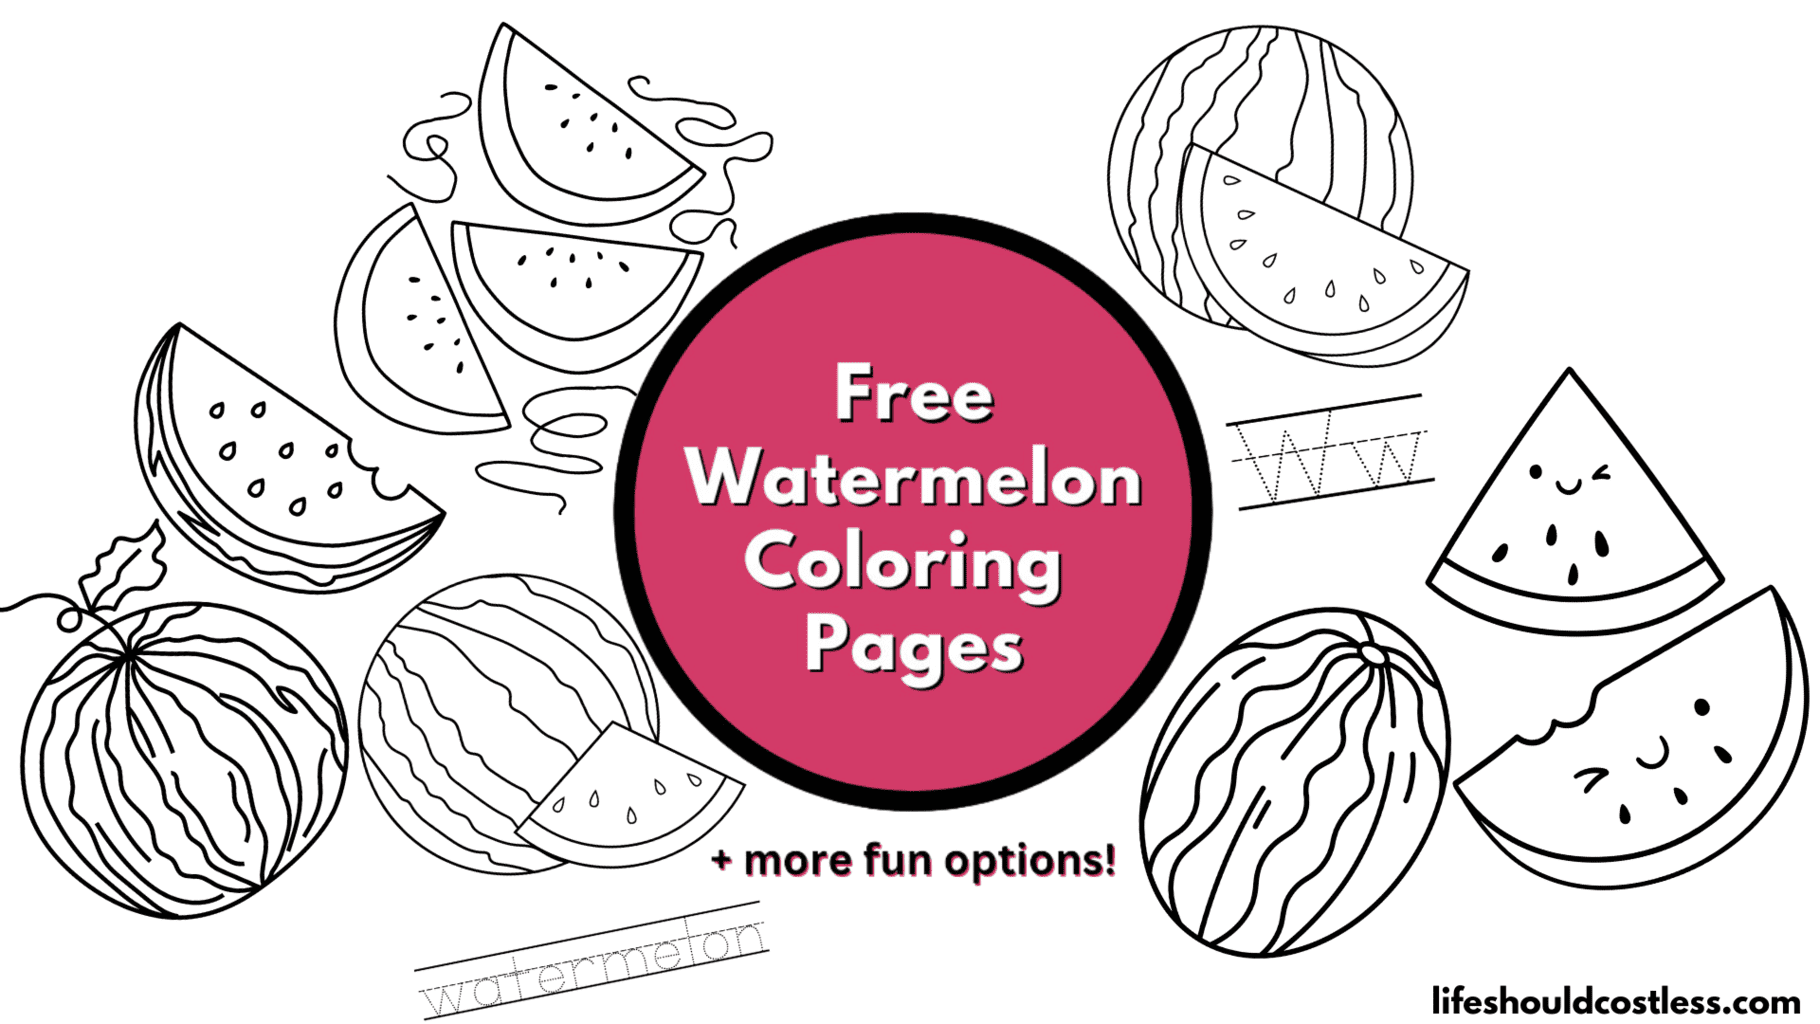 Watermelon coloring pages free printable pdf templates